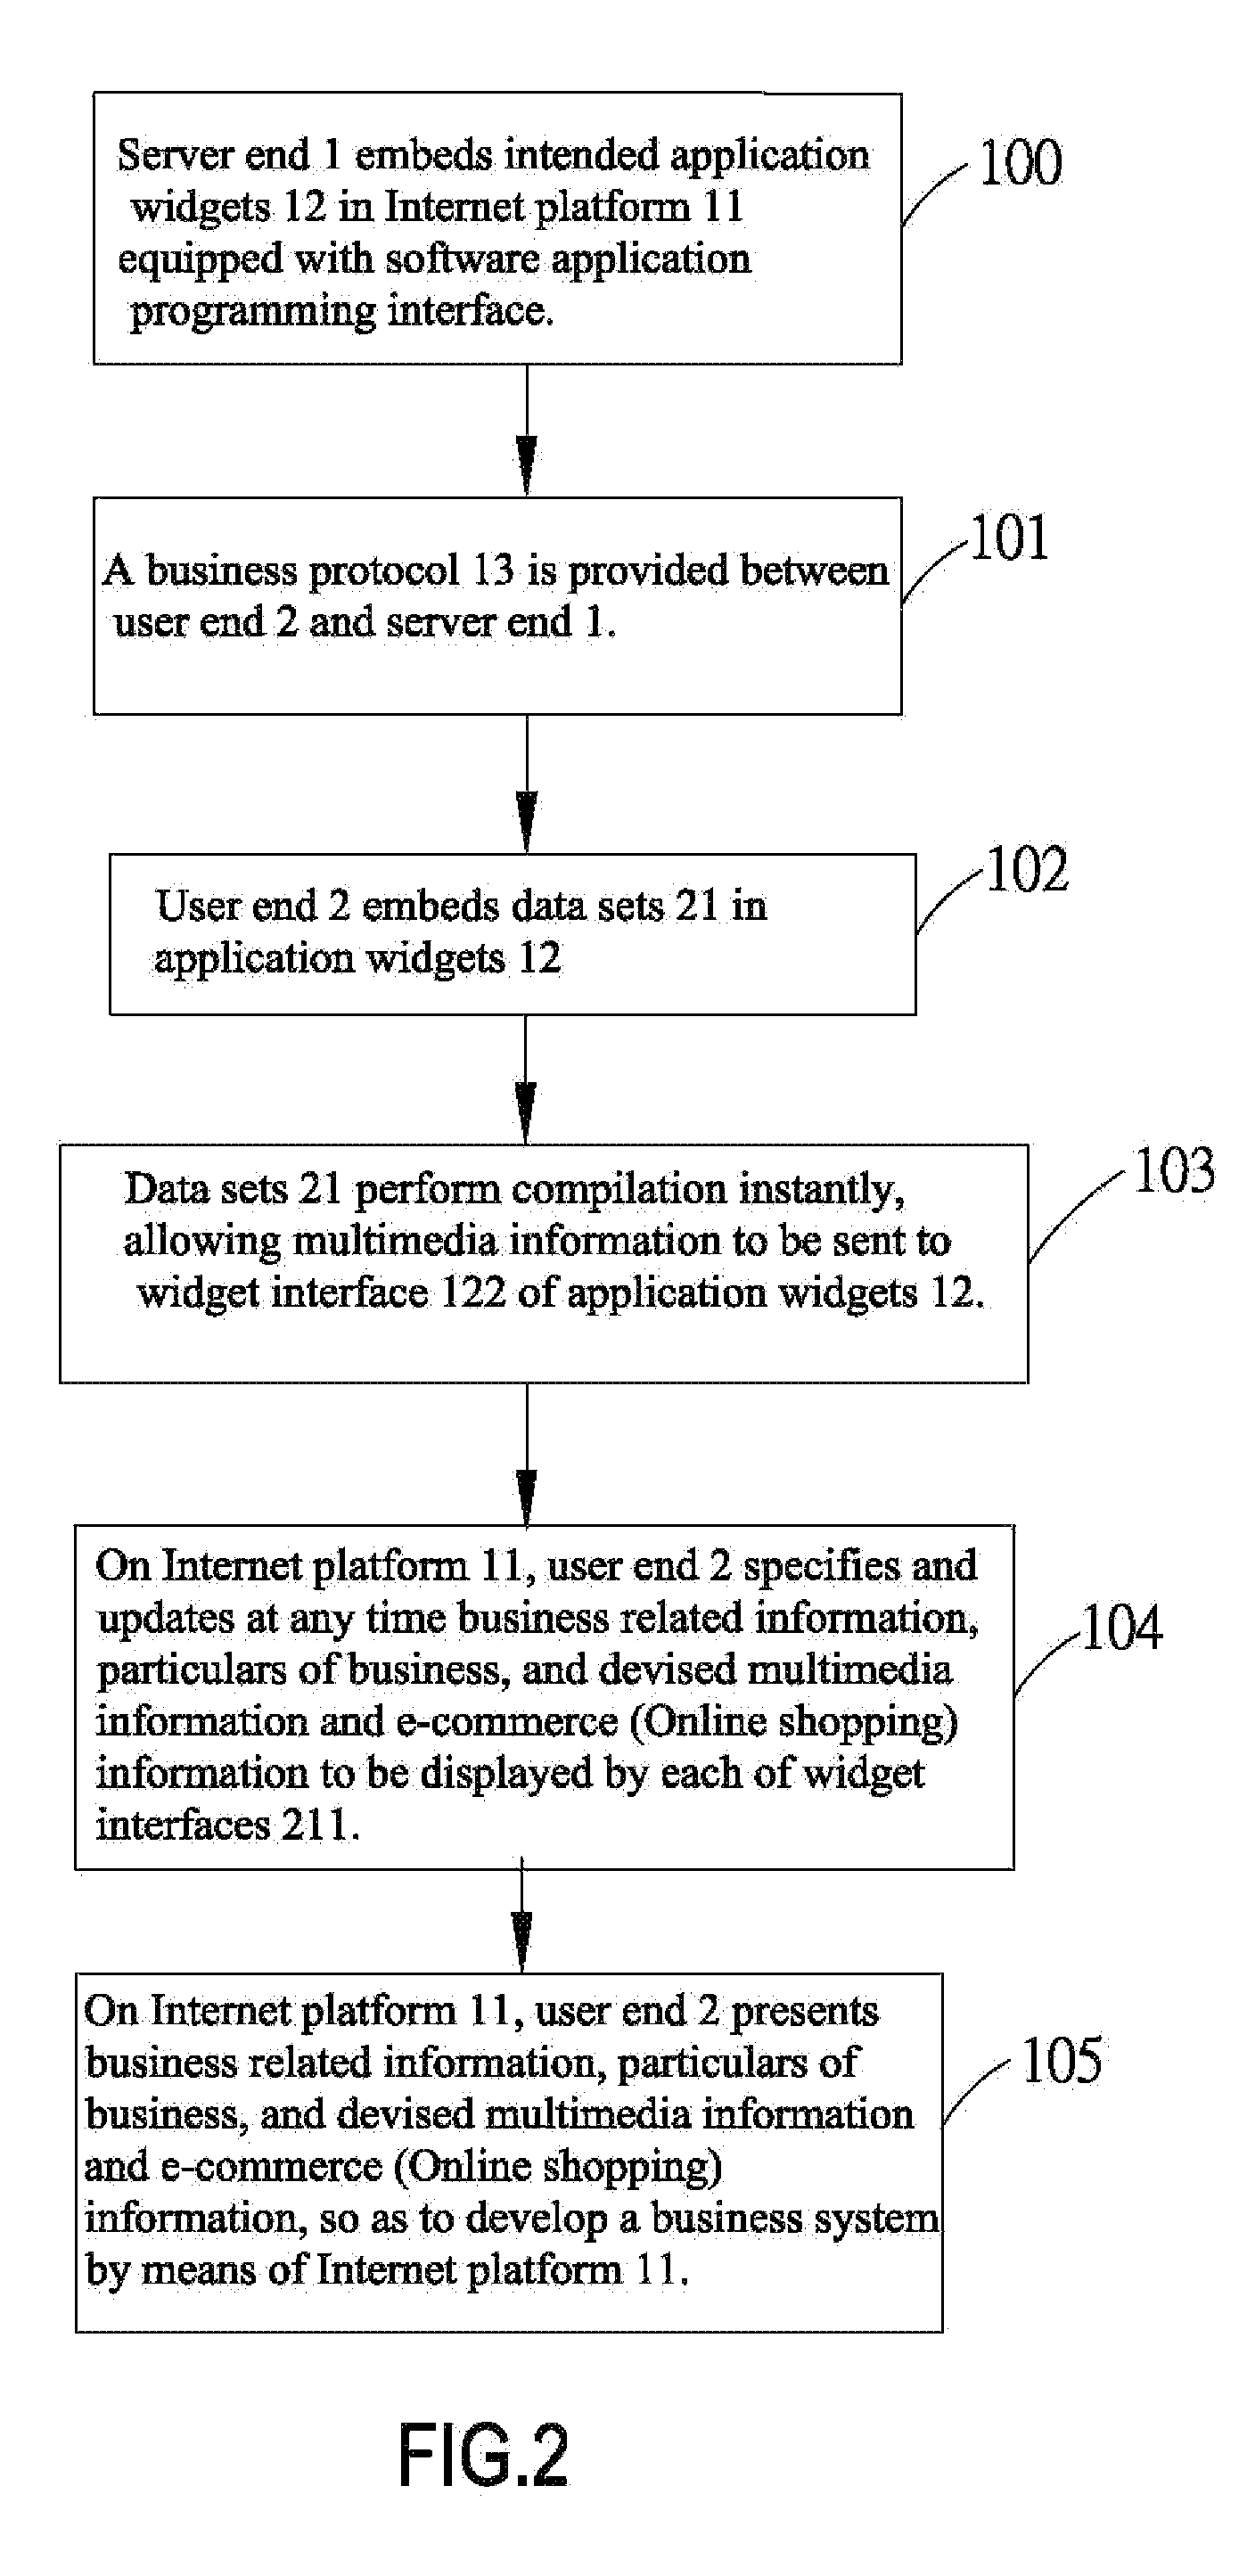 Business model based on multi-level application widgets and system thereof